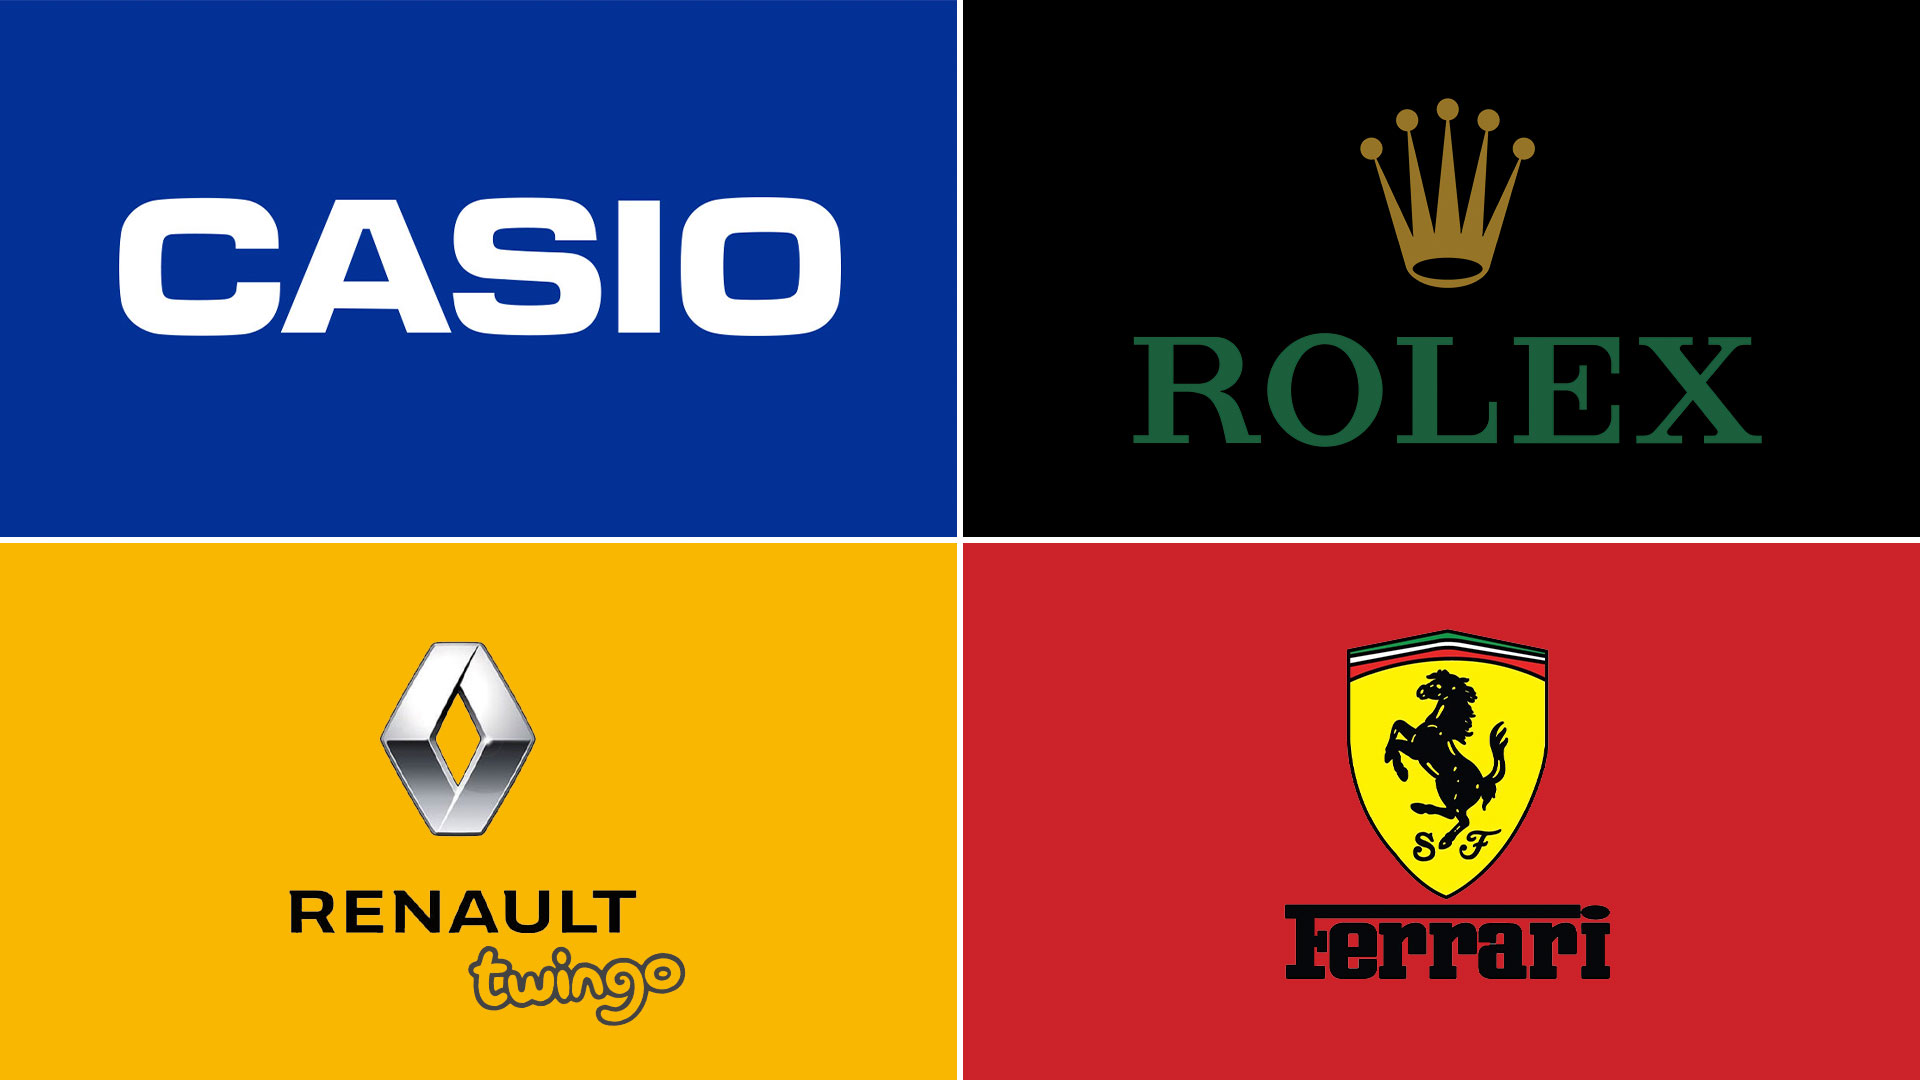 Casio, Rolex, Ferrari and Twingo, the brands named in the song